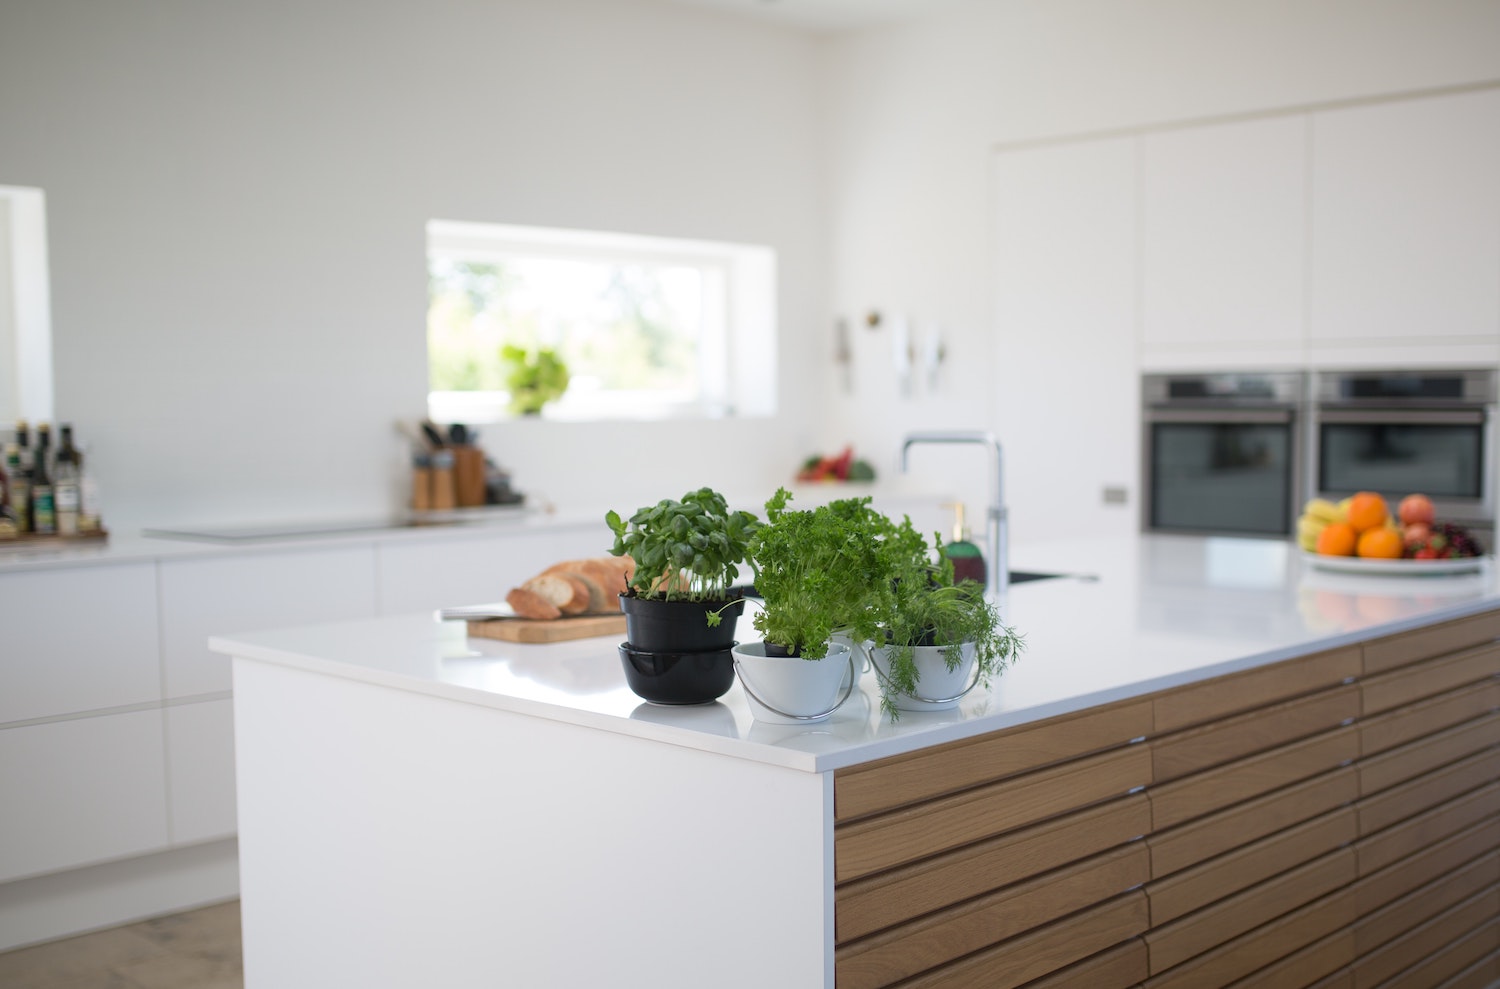 What Colour Splashback Goes With a White Kitchen?